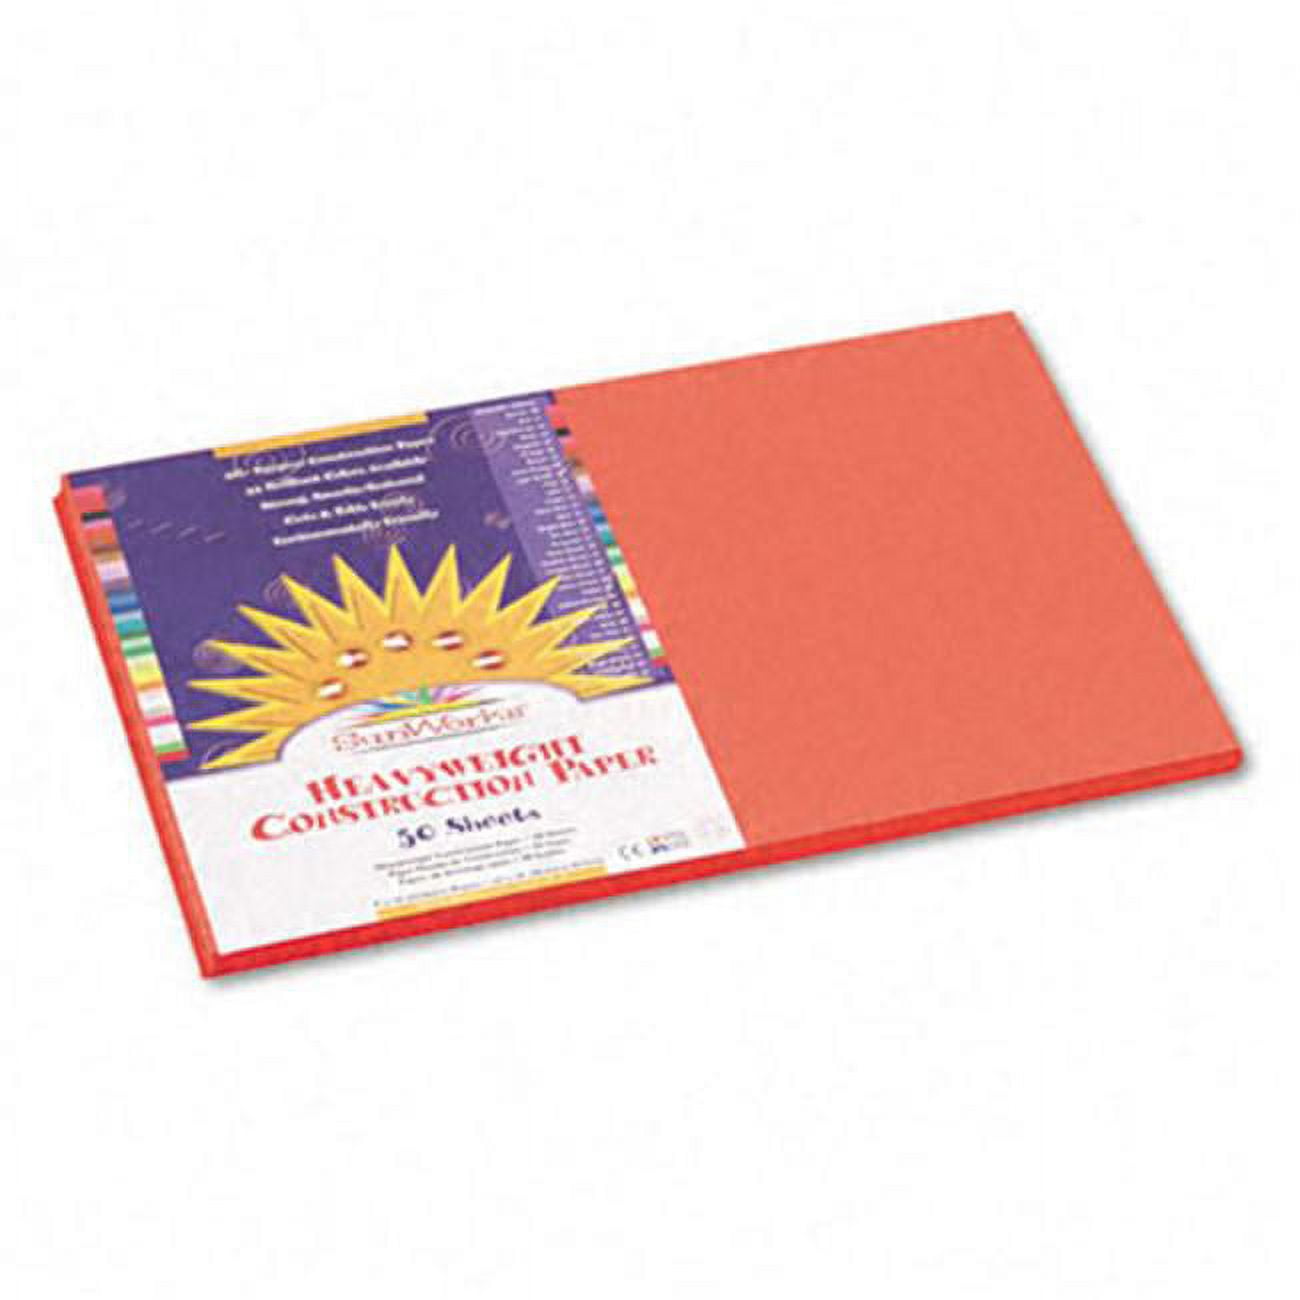  Prang (Formerly SunWorks) Construction Paper, Bright White,  12 x 18, 50 Sheets : Arts, Crafts & Sewing